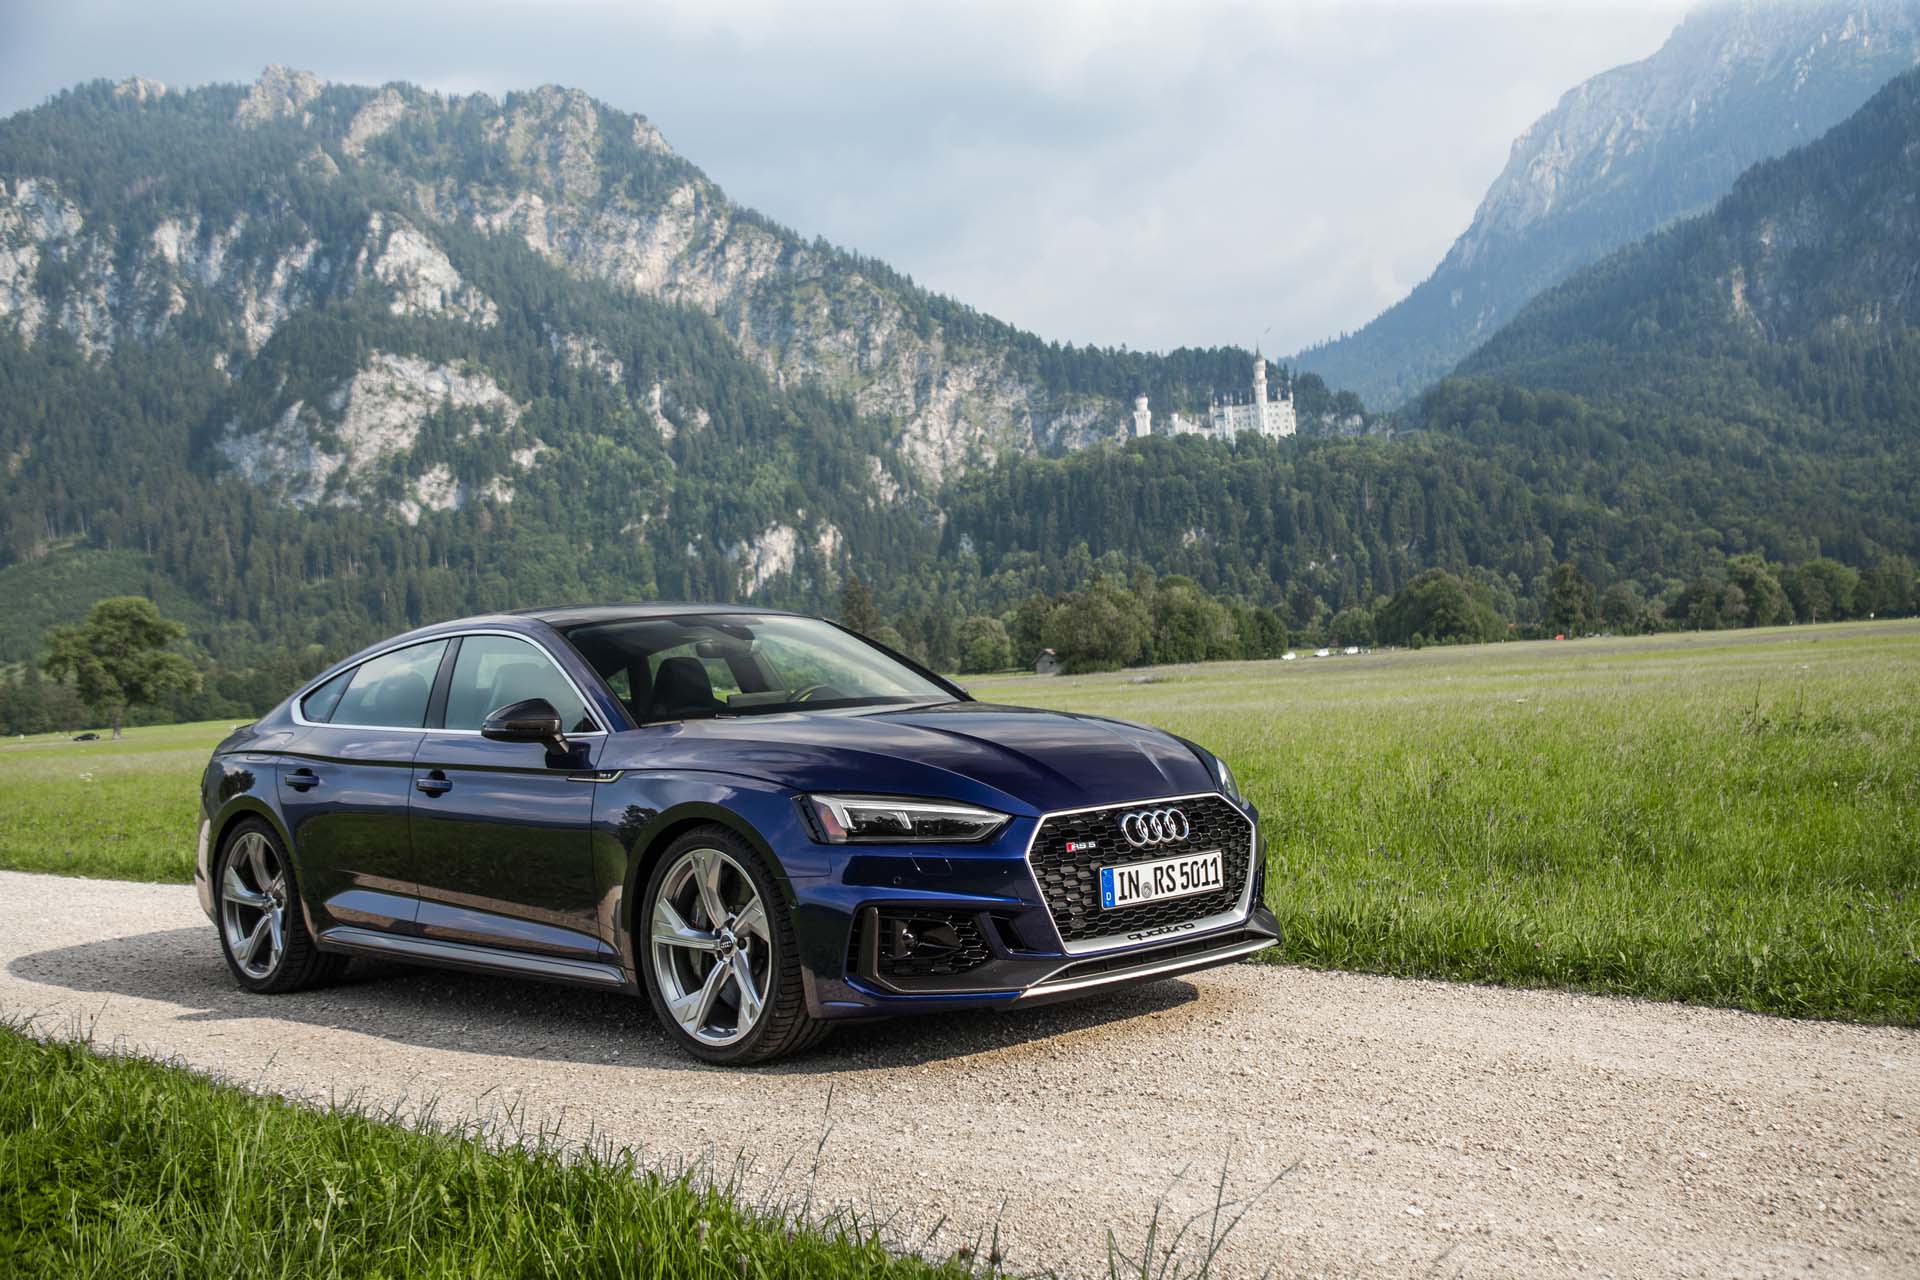 2019 Audi RS 5 Sportback first drive review: Faith at unholy speeds